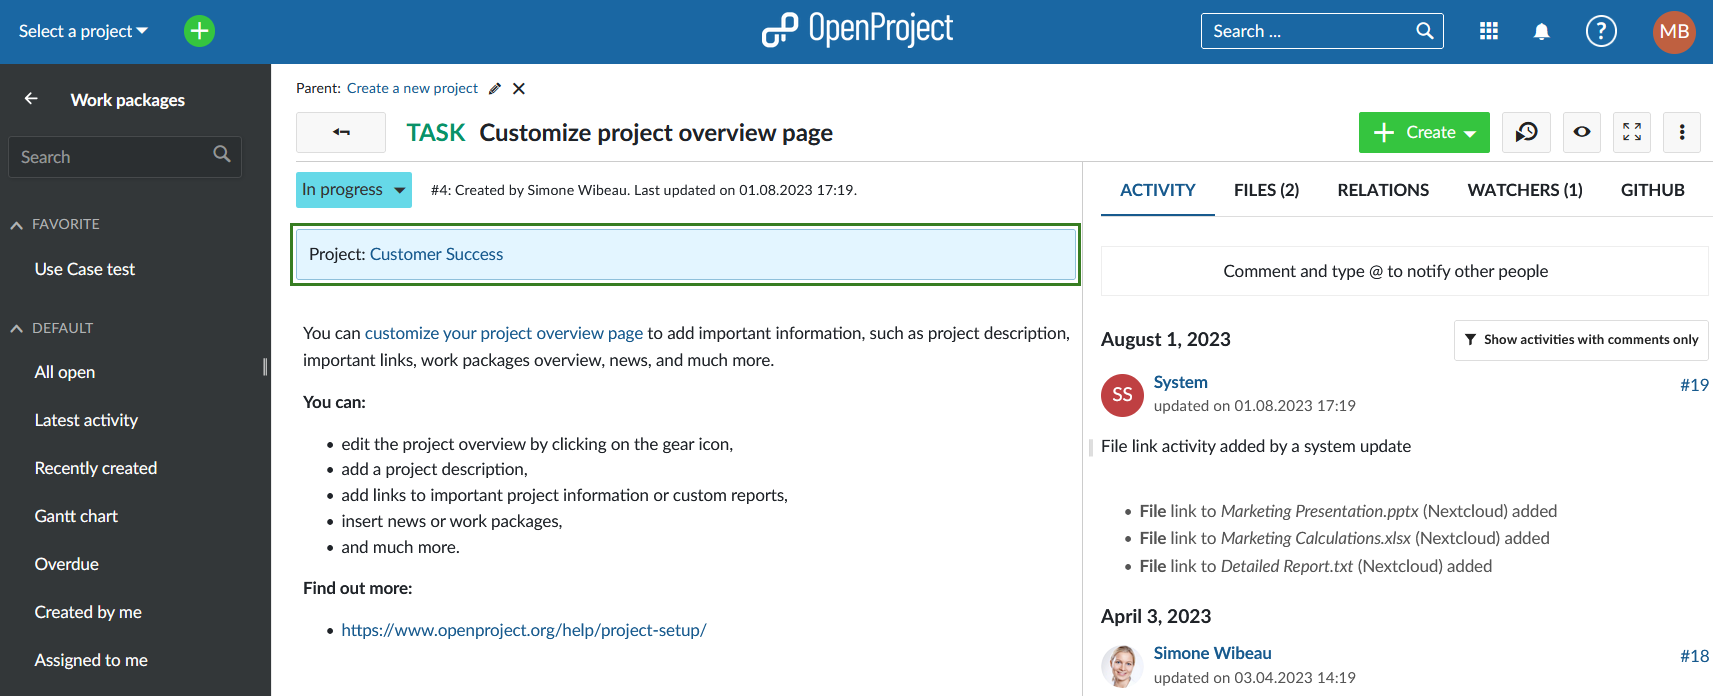 The project containing the current work package is highlighted when opening it from outside the project